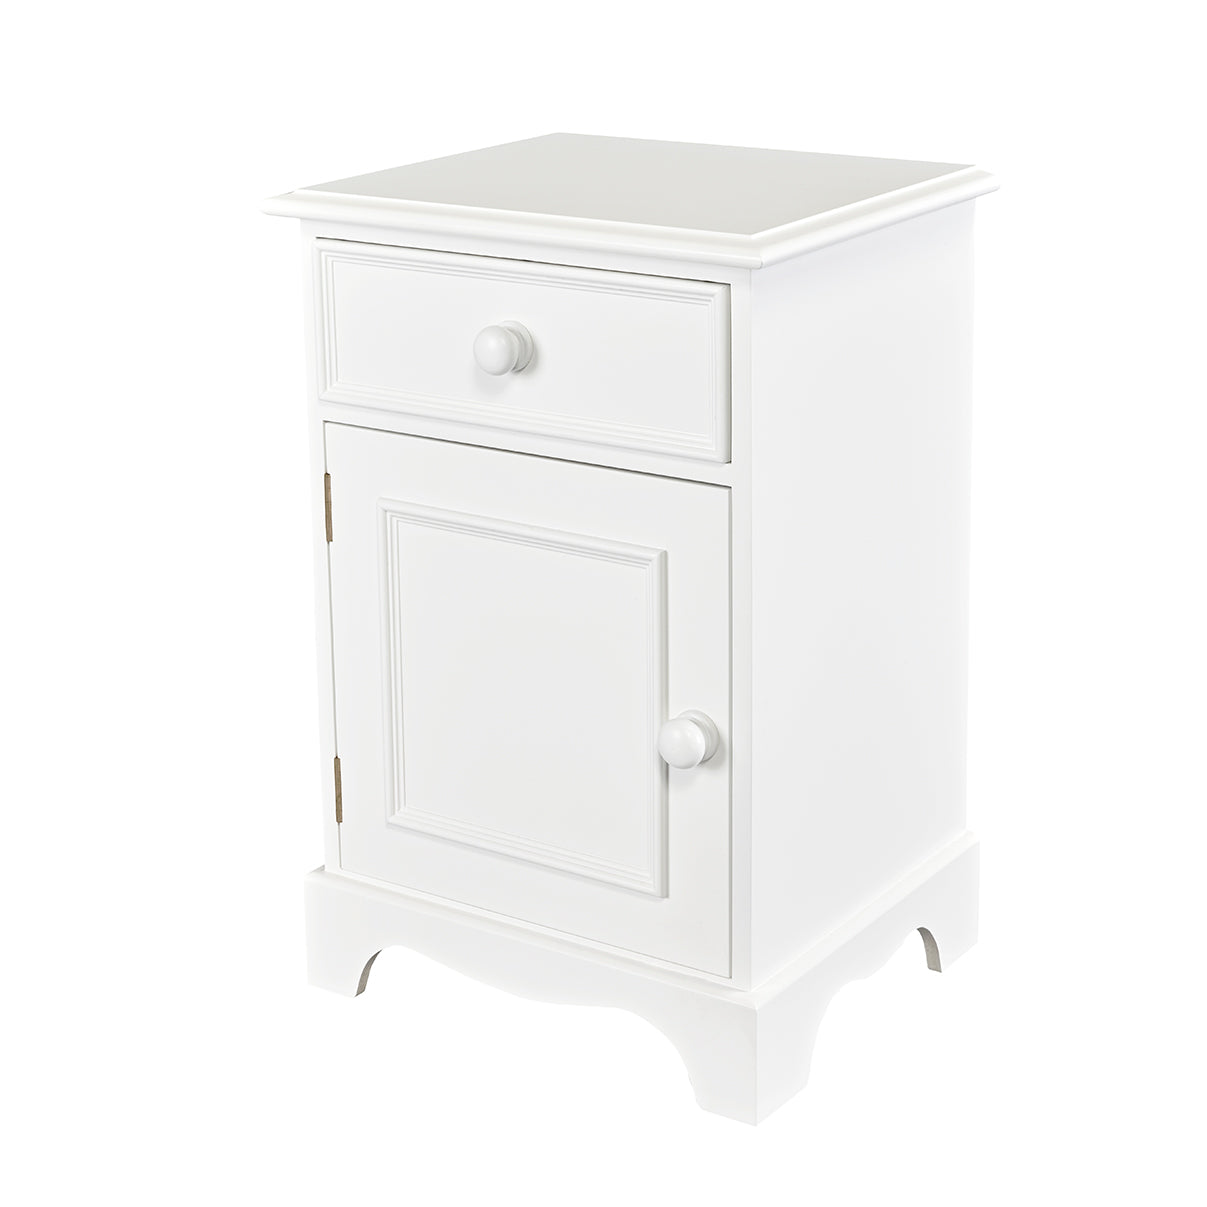 Plain white bedside table with drawer for kids room & nursery | Dragons of Walton Street